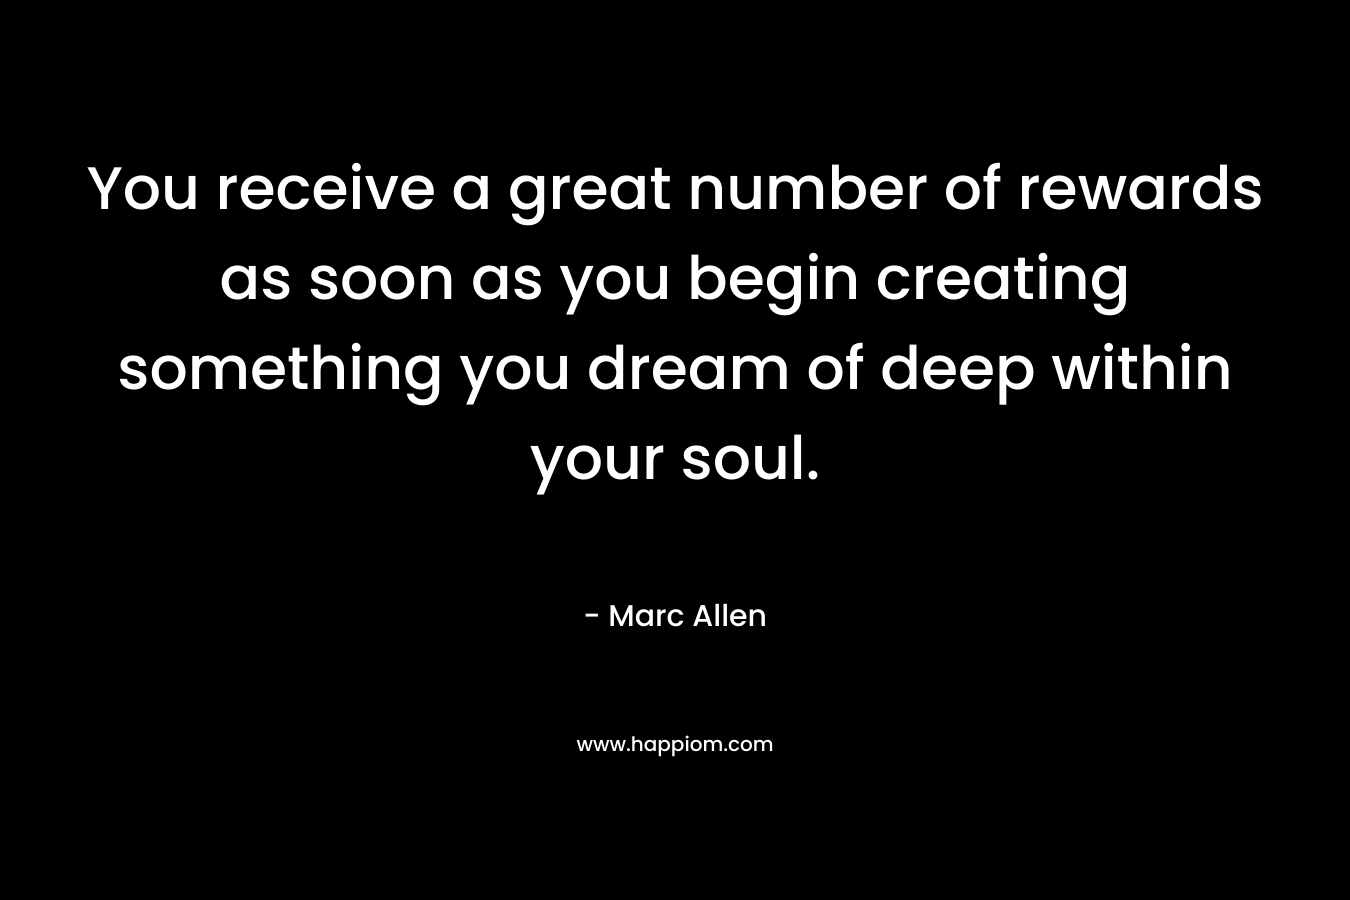 You receive a great number of rewards as soon as you begin creating something you dream of deep within your soul.